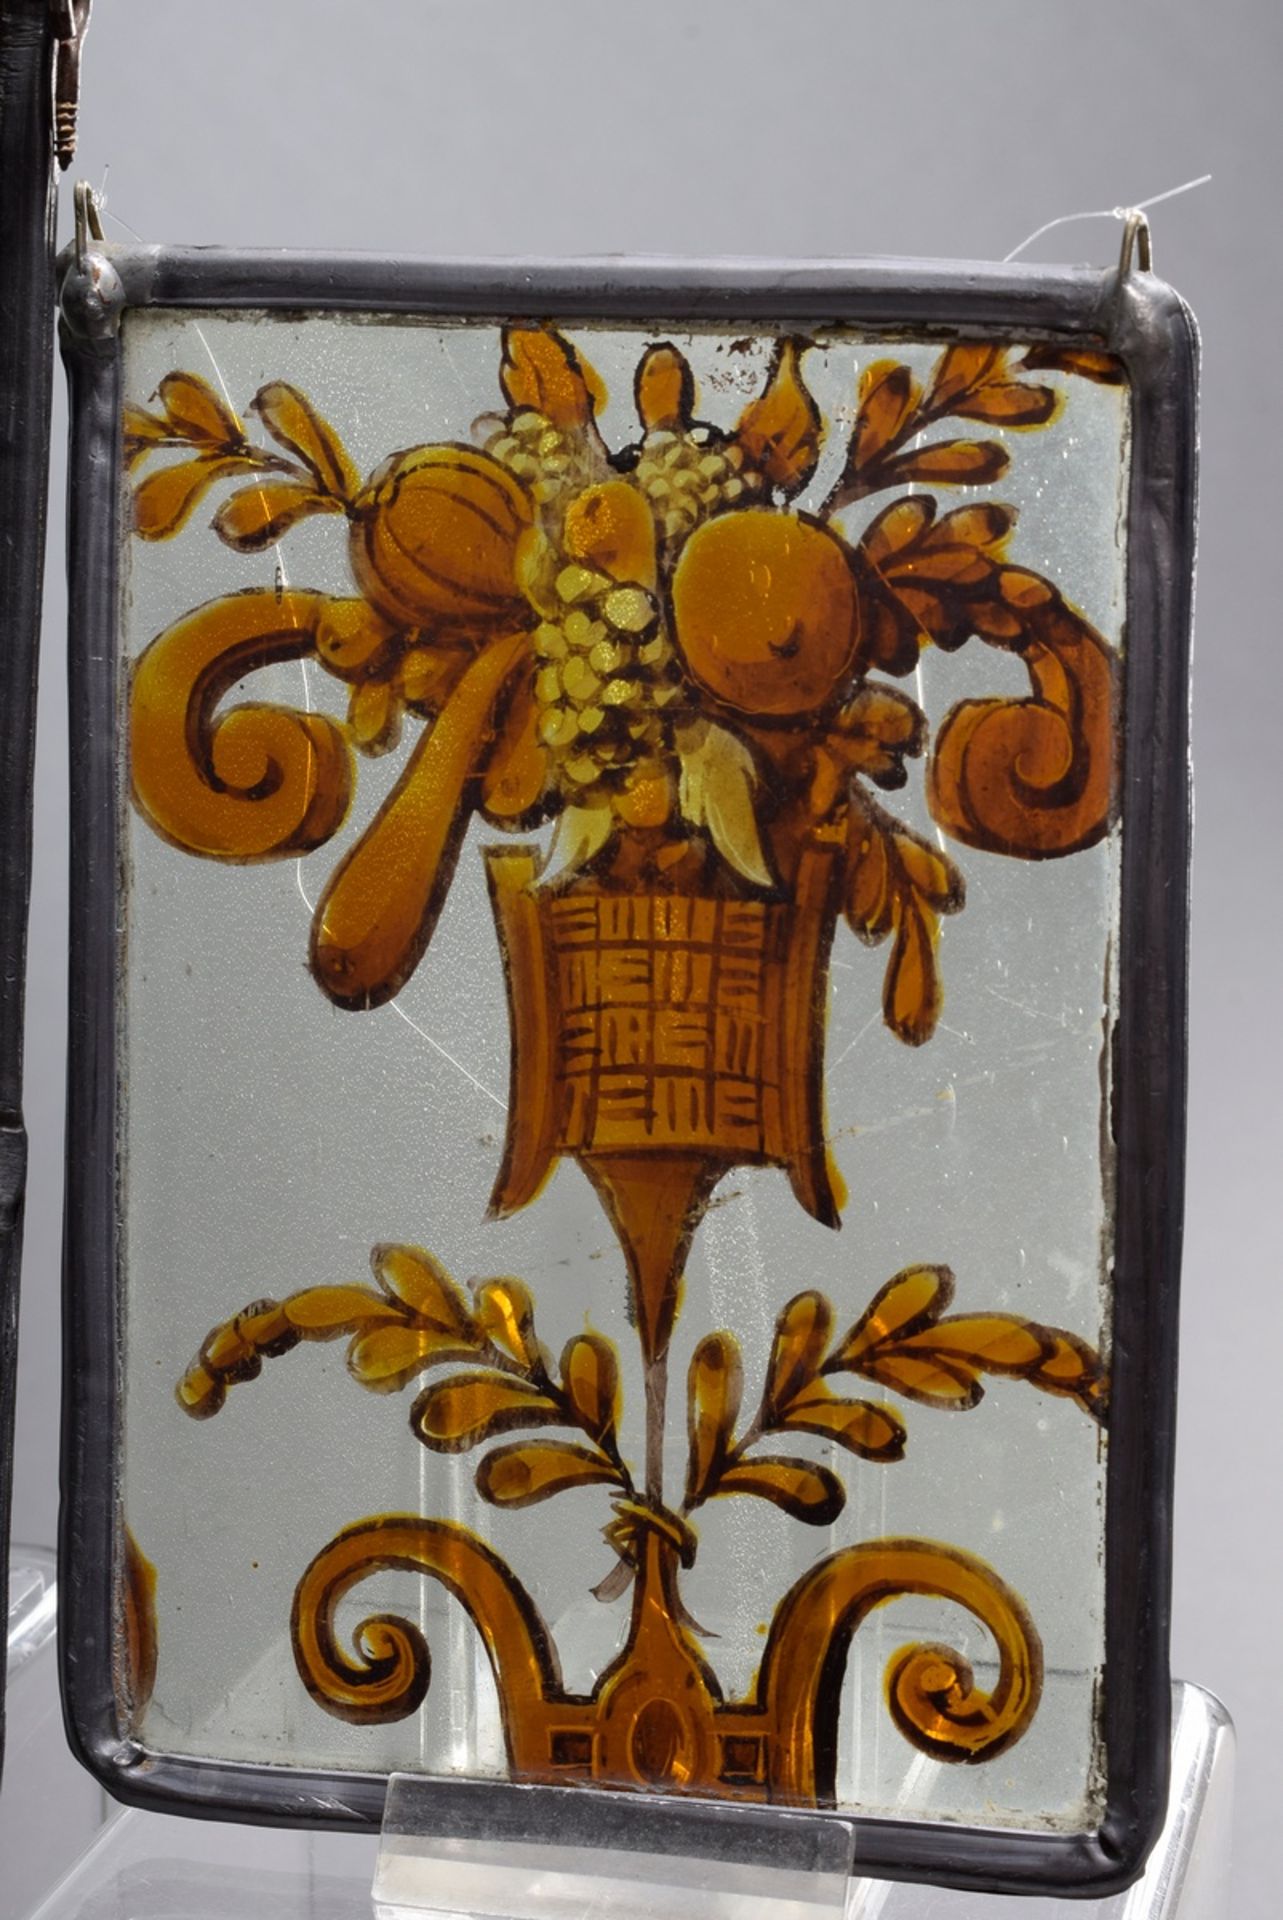 7 Various antique leaded glass with antique scenes, sayings, figural representations etc. in square - Image 4 of 12